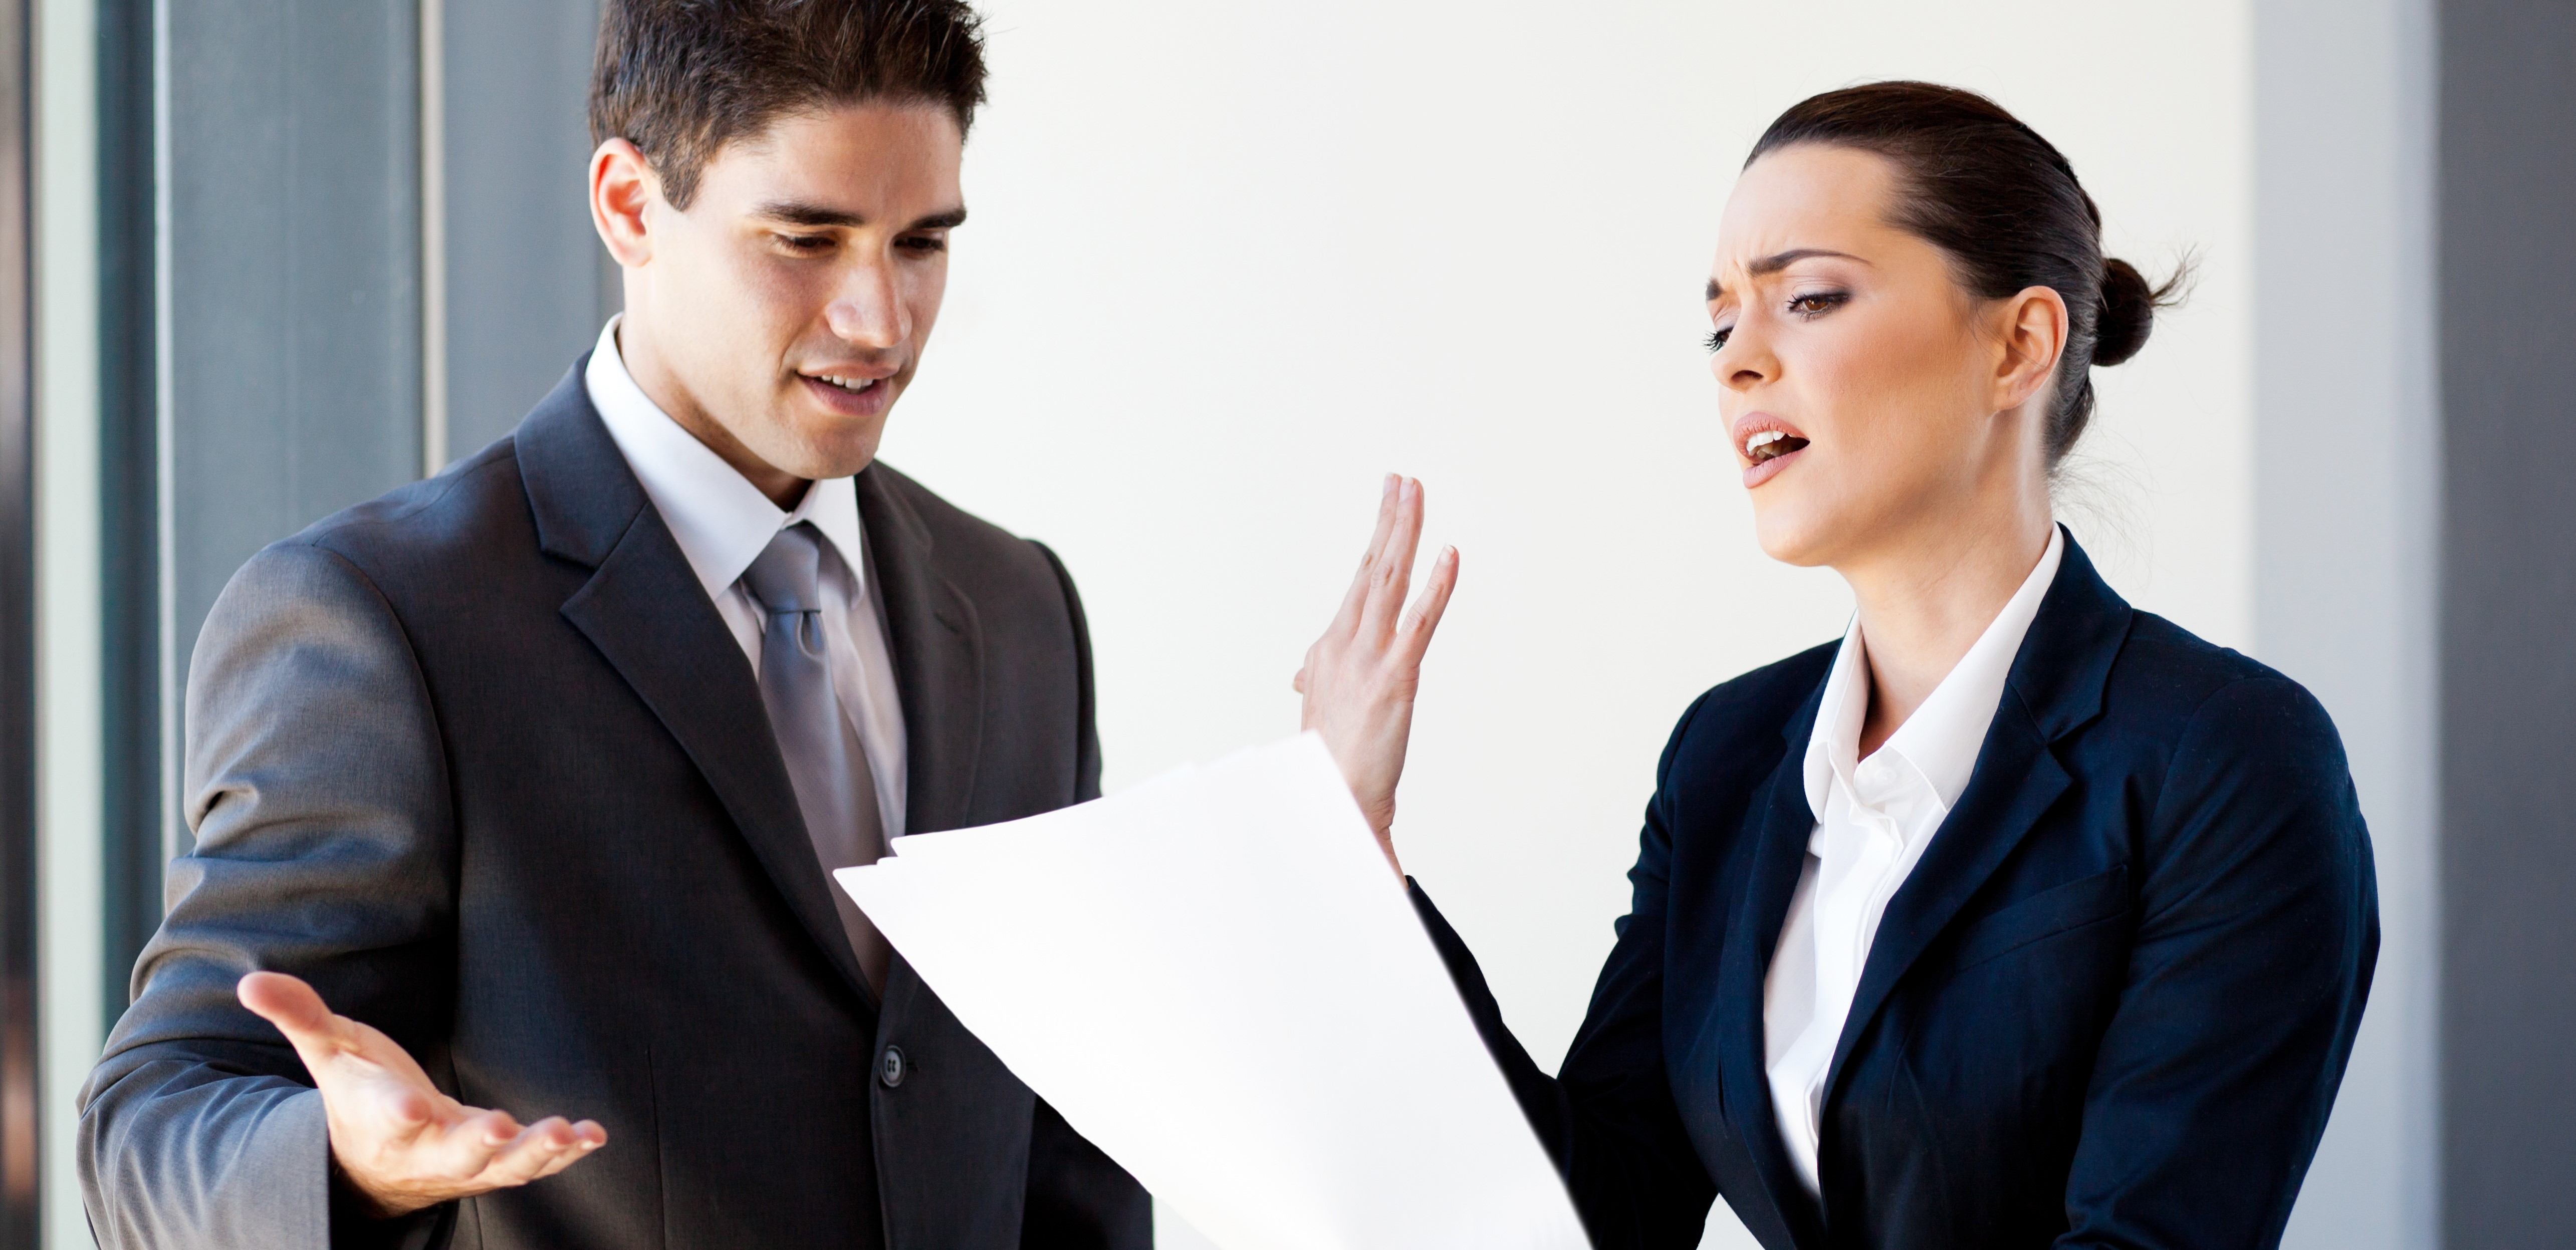 4 Productive Ways to Deal with Argumentative Employees